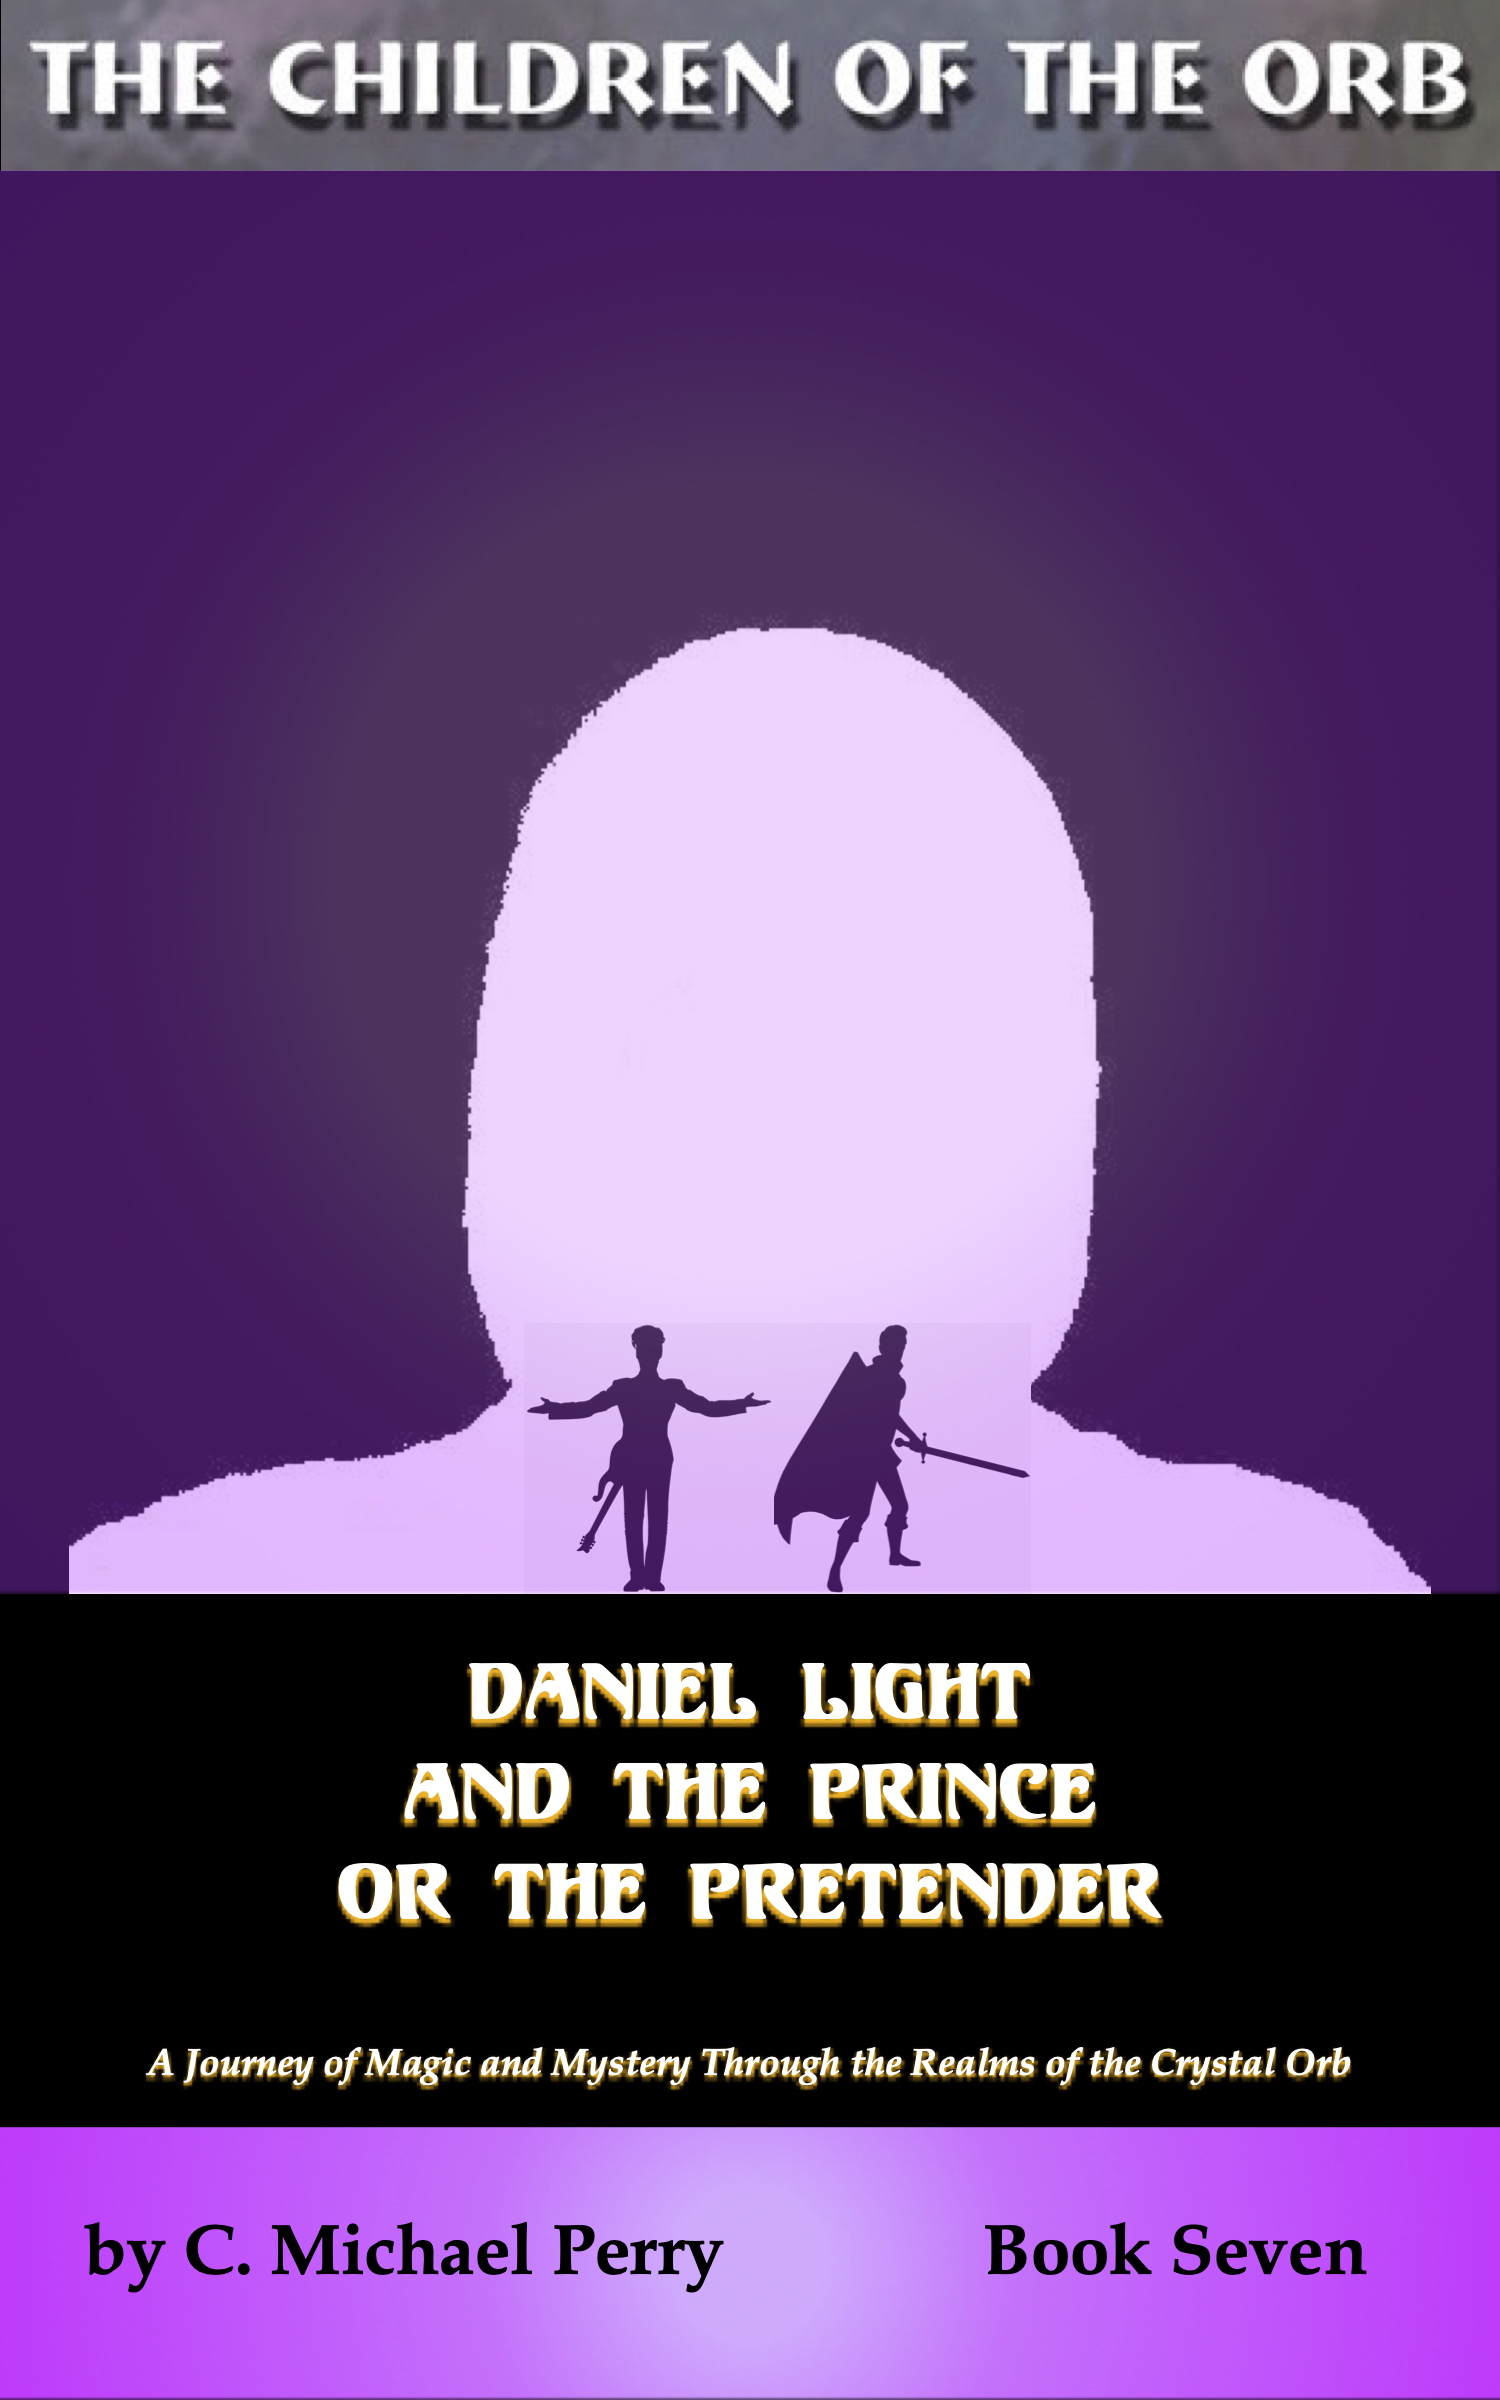 Daniel Light and the Prince or the Pretender • Book 7